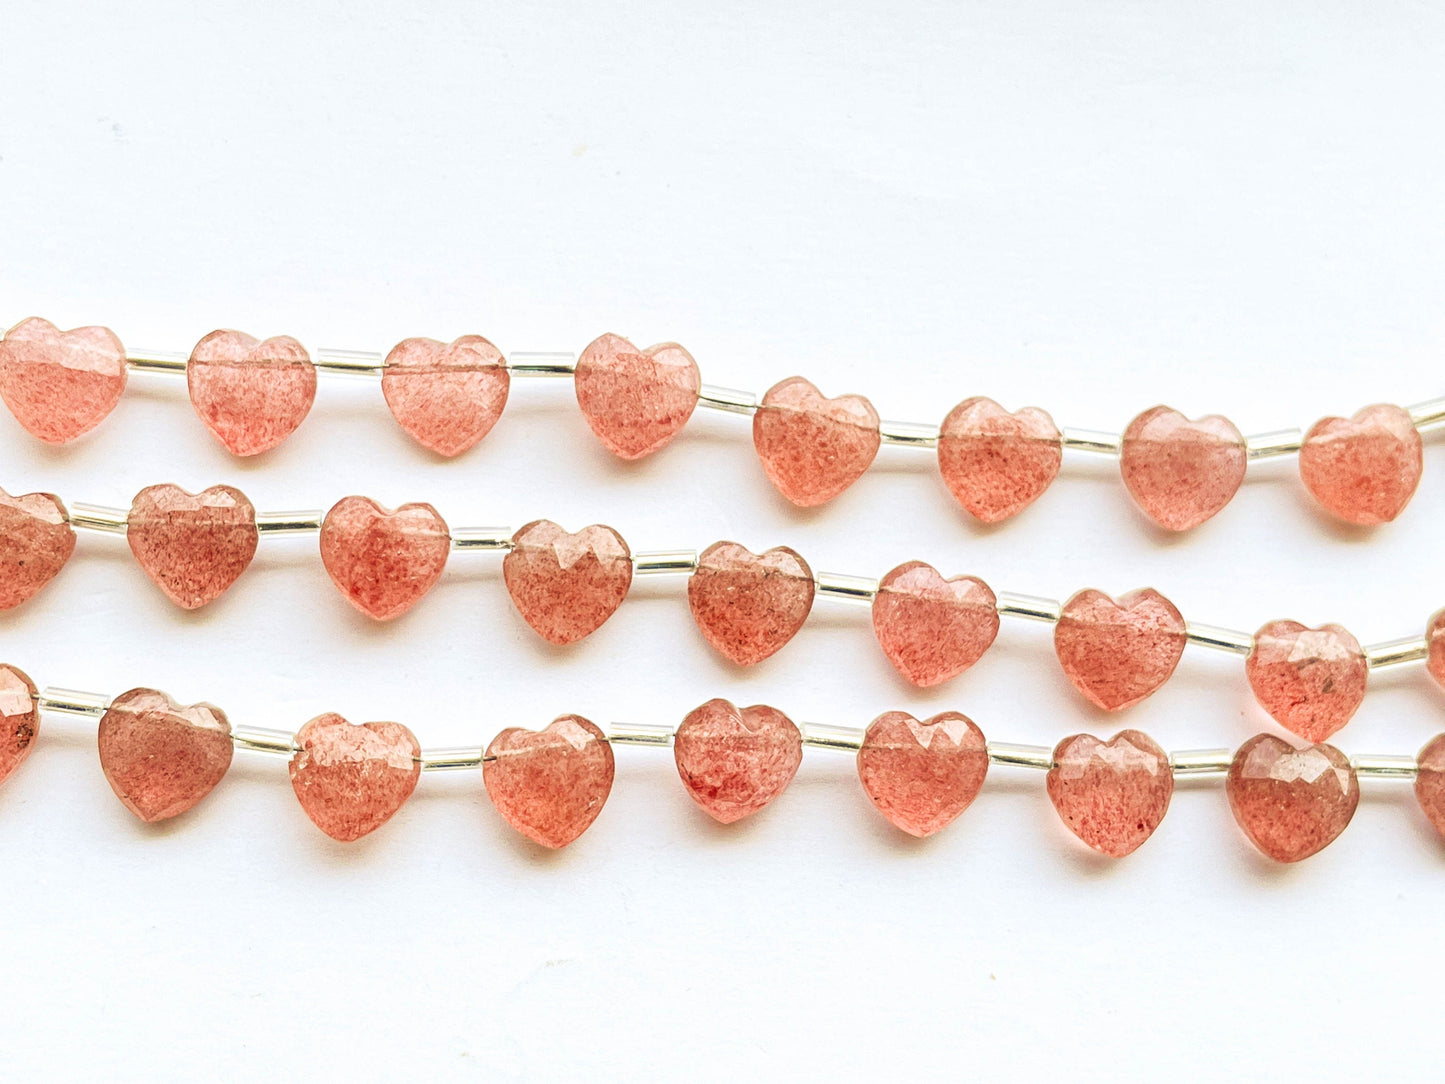 Pink Strawberry Quartz Heart Shape Faceted Briolette Beads, Side Drill, 9x9mm, 12 Pieces, Beadsforyourjewelry